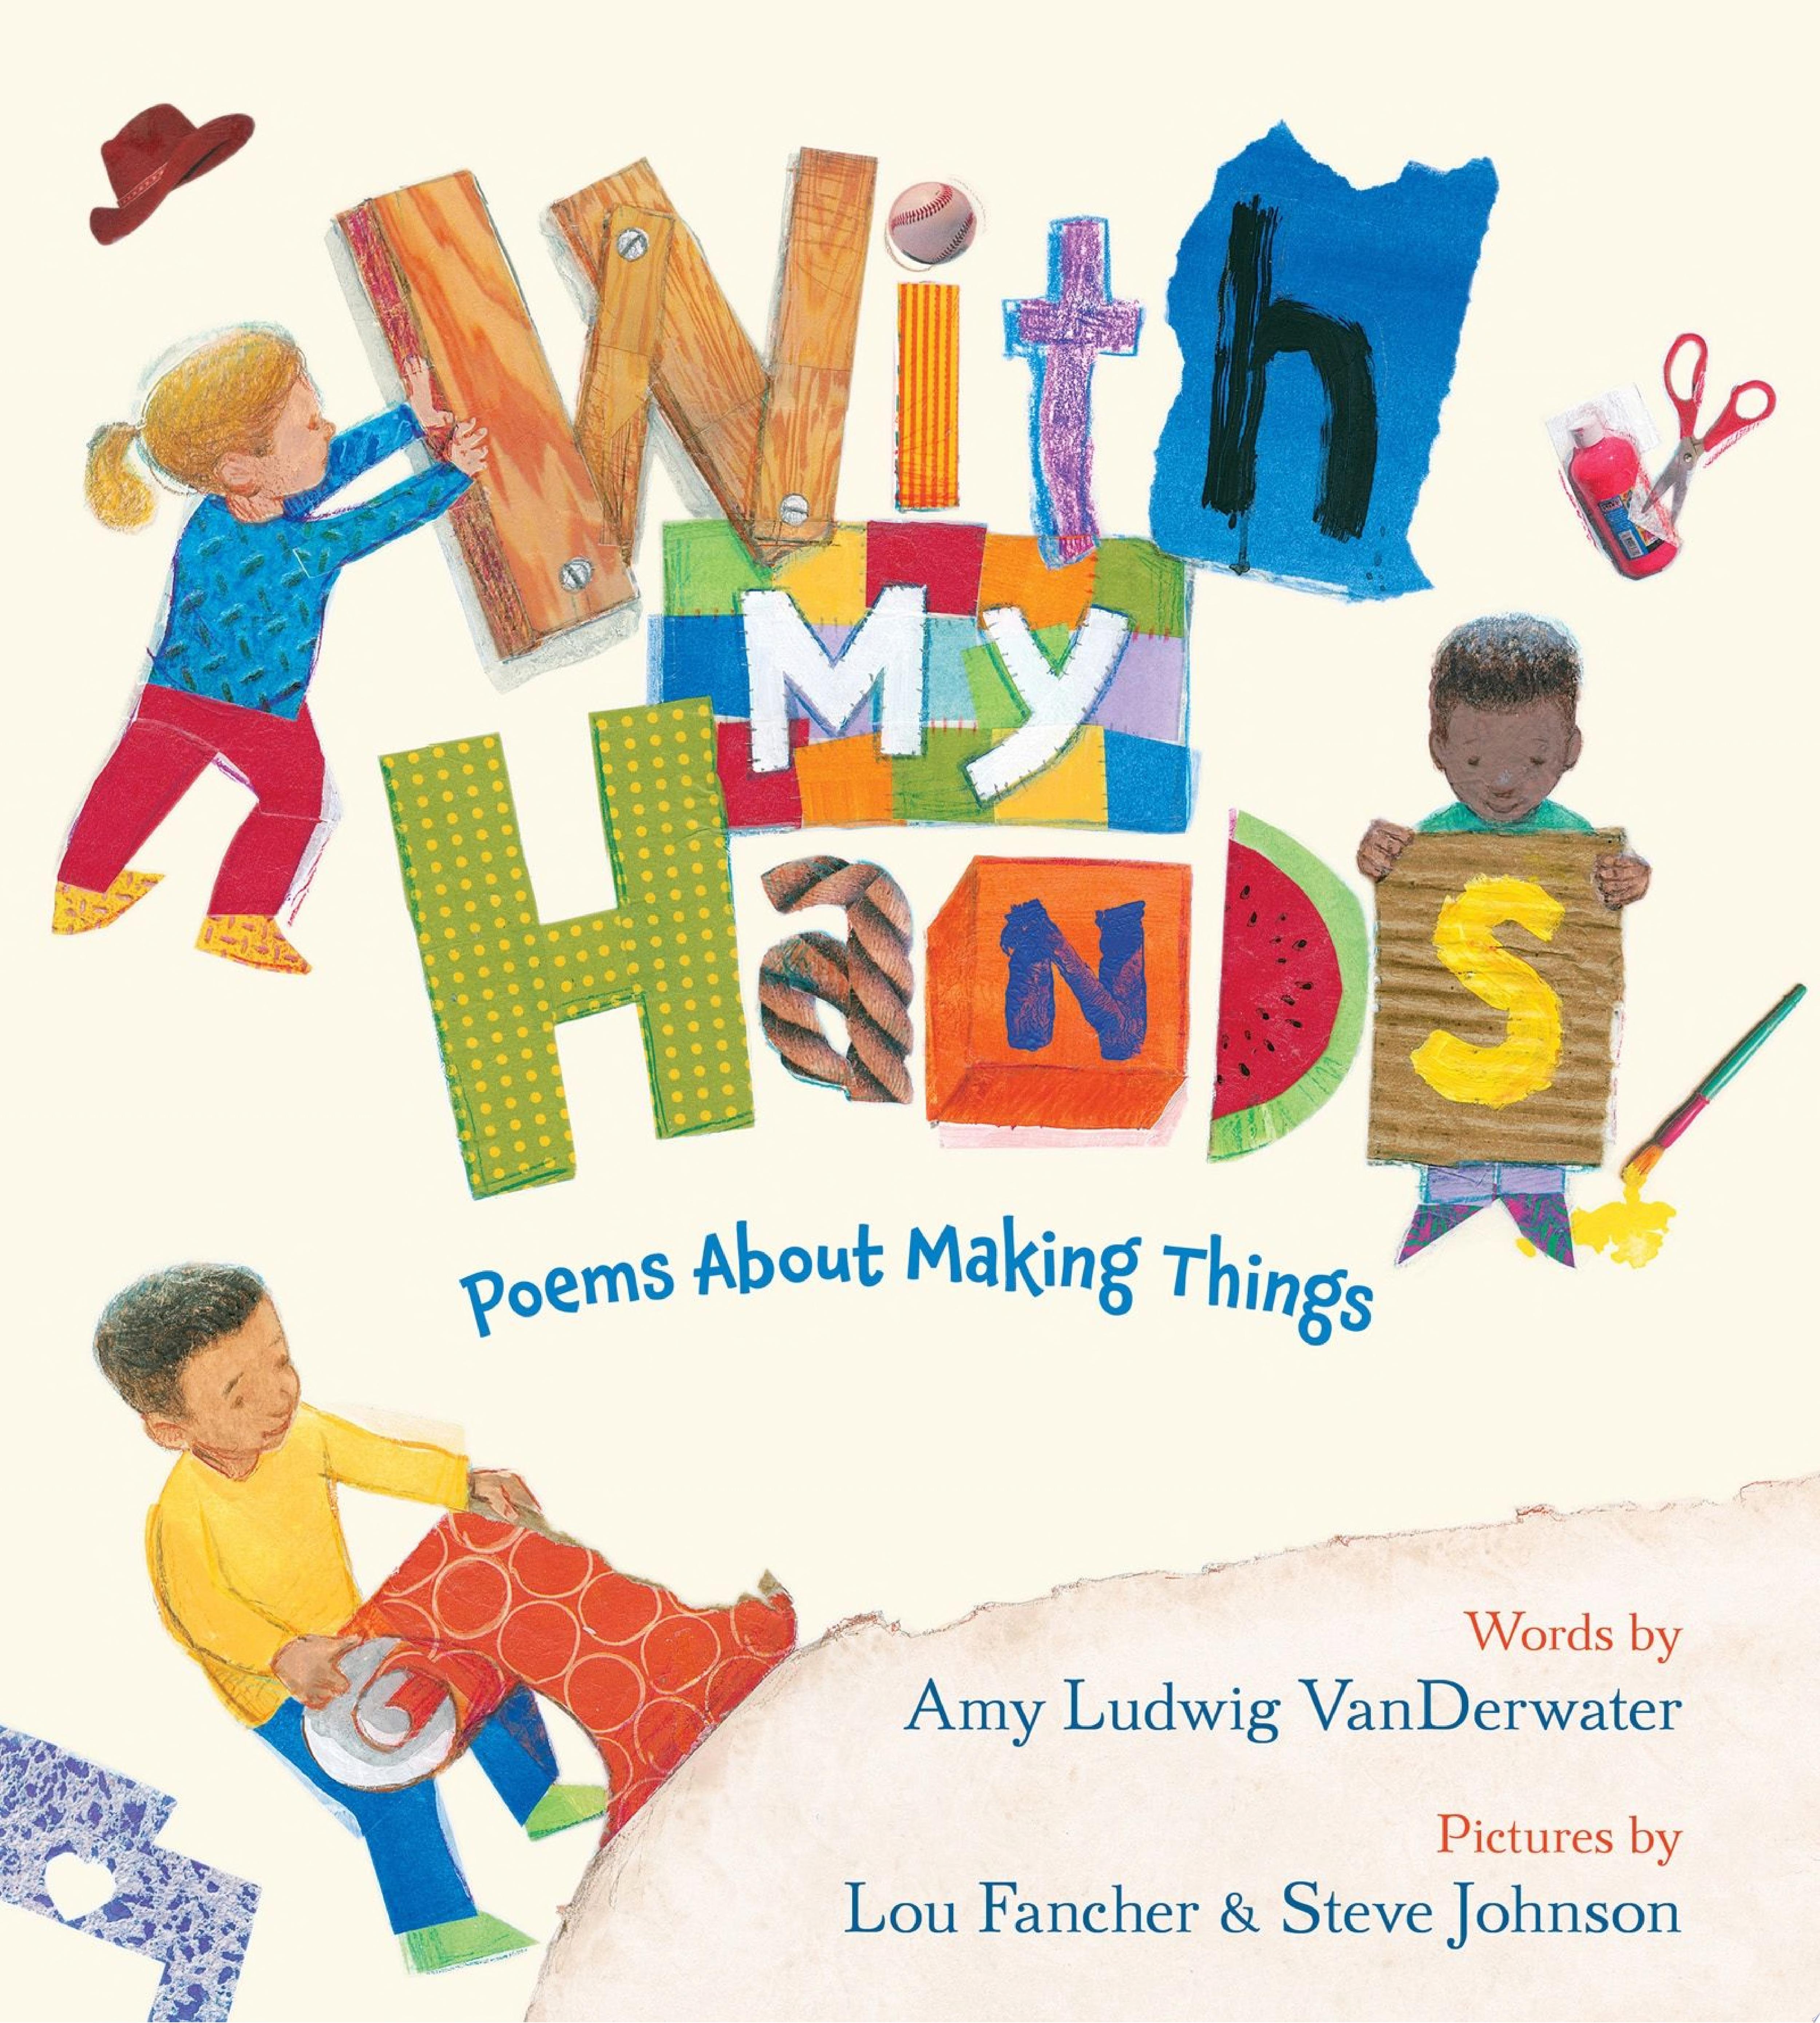 Image for "With My Hands"